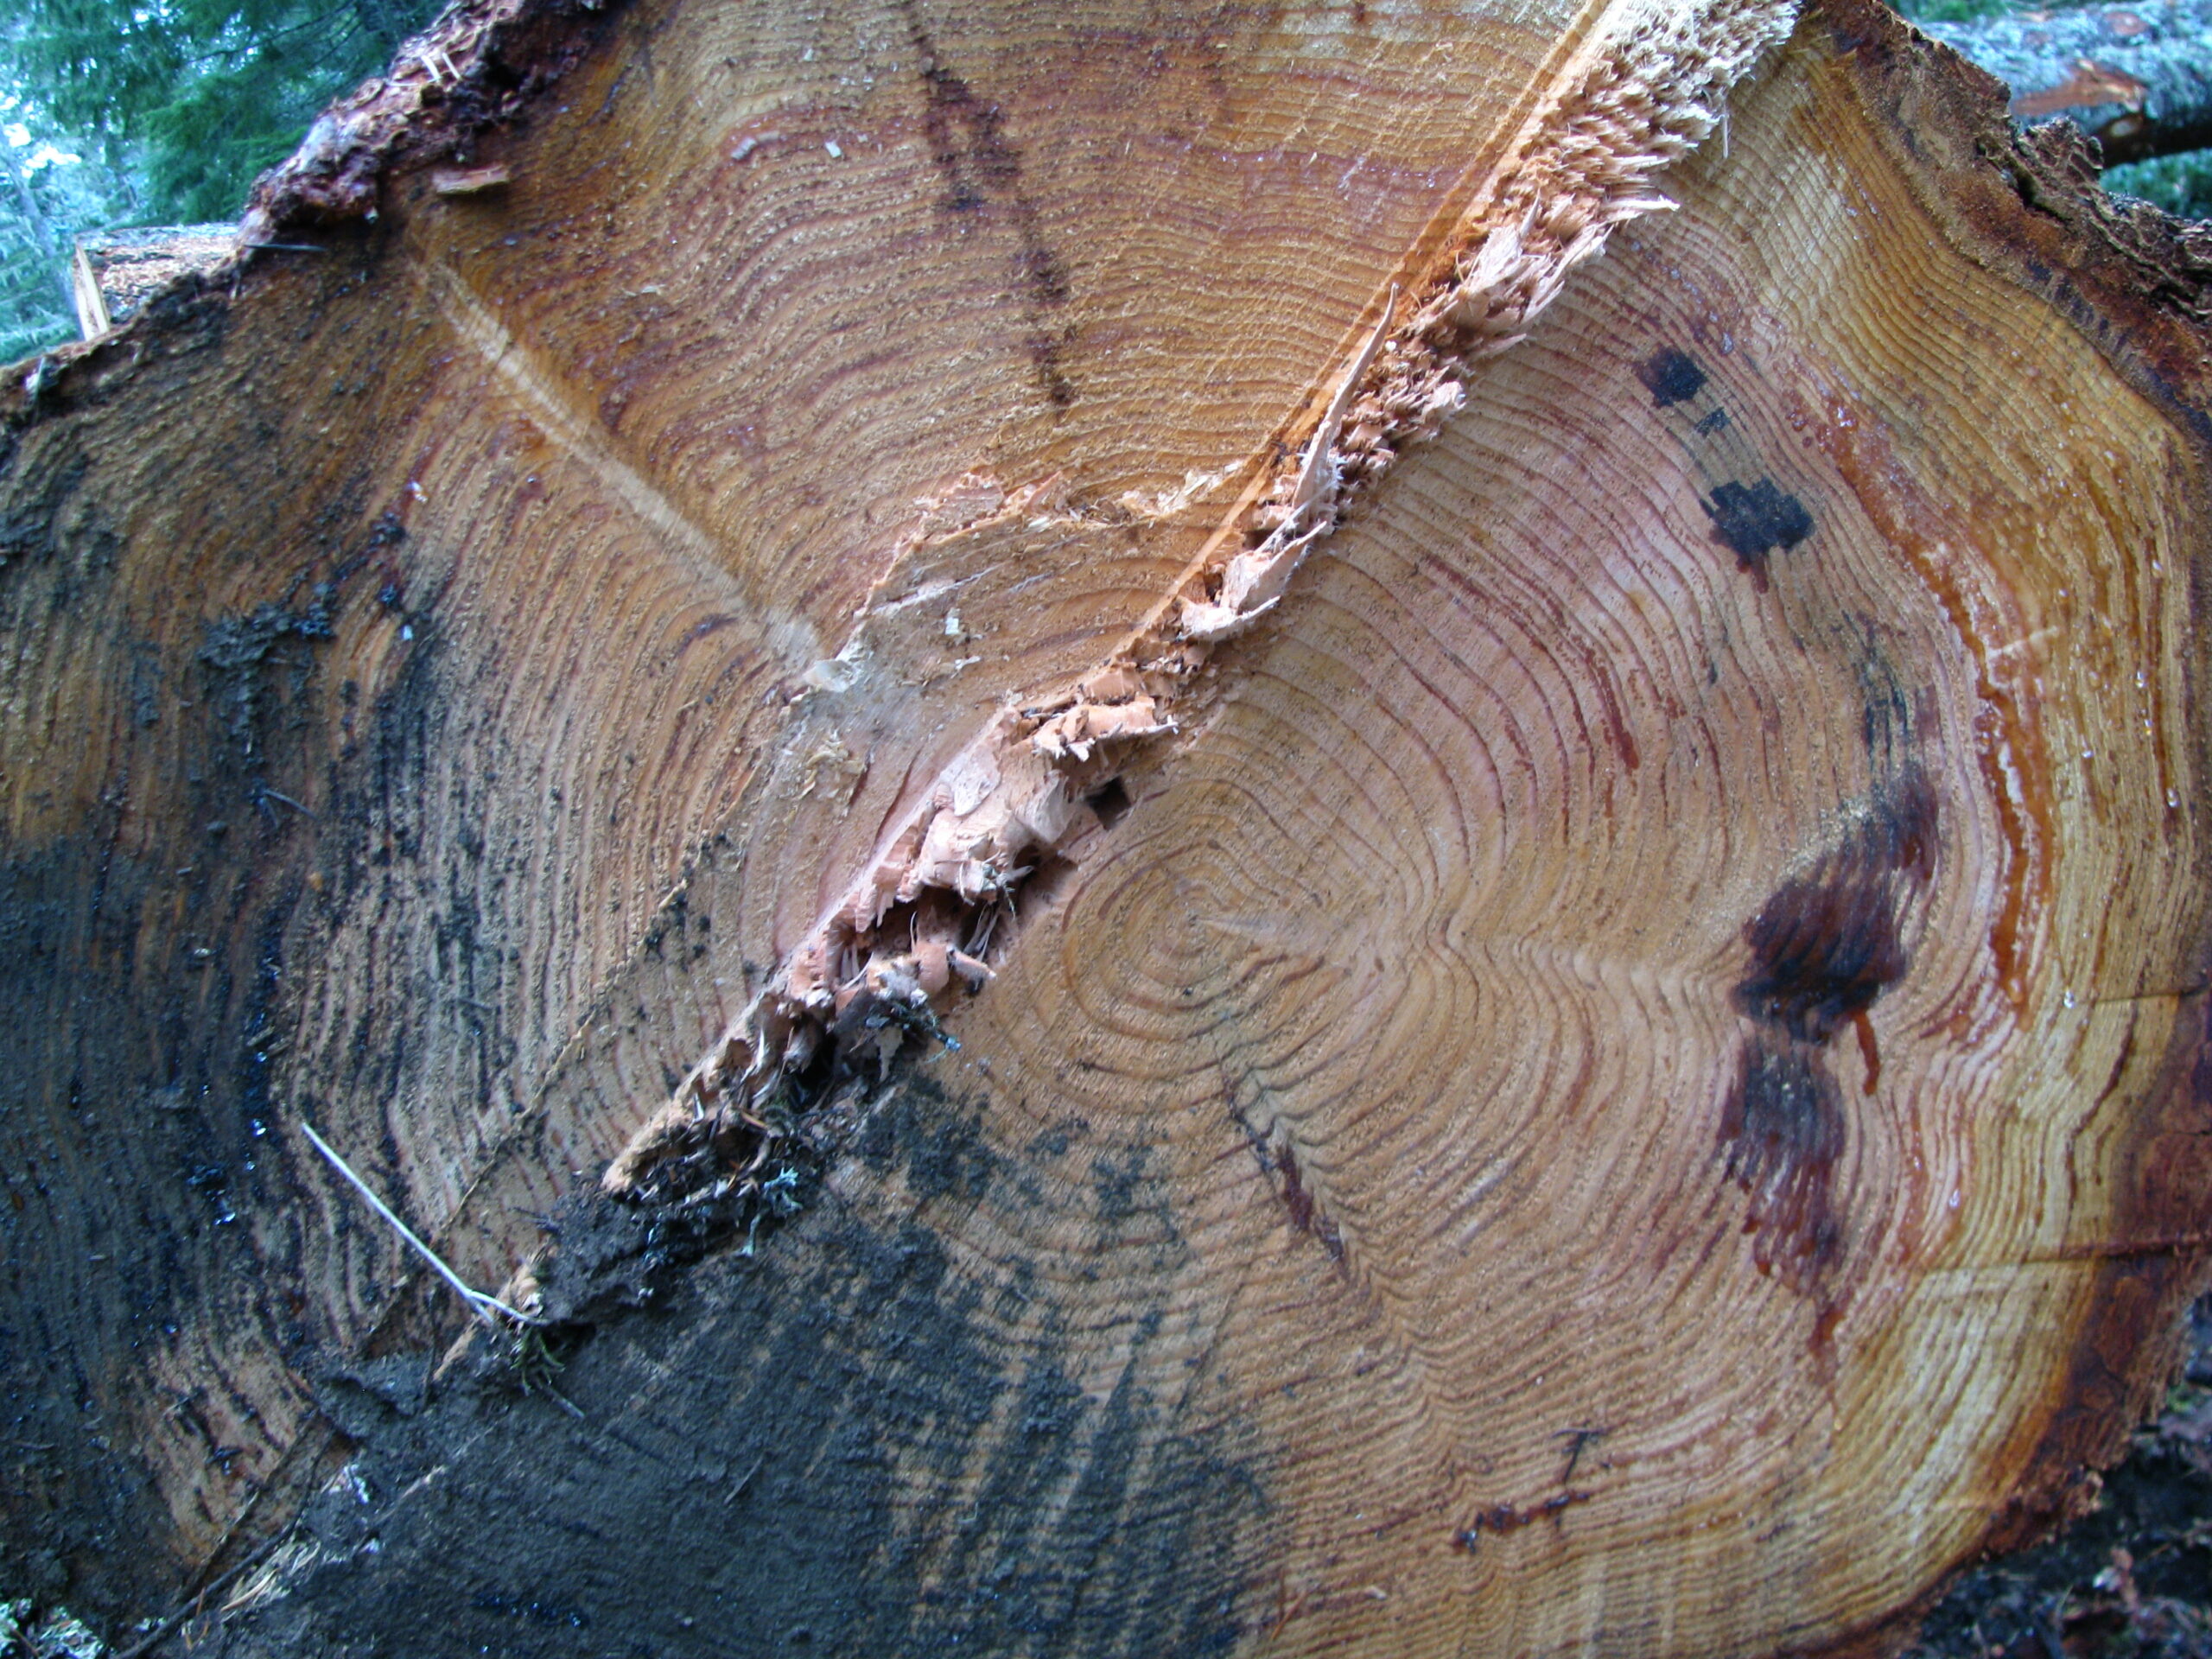 This is a cross section of a cut tree. It is cut unevenly in a diagonal through the middle.